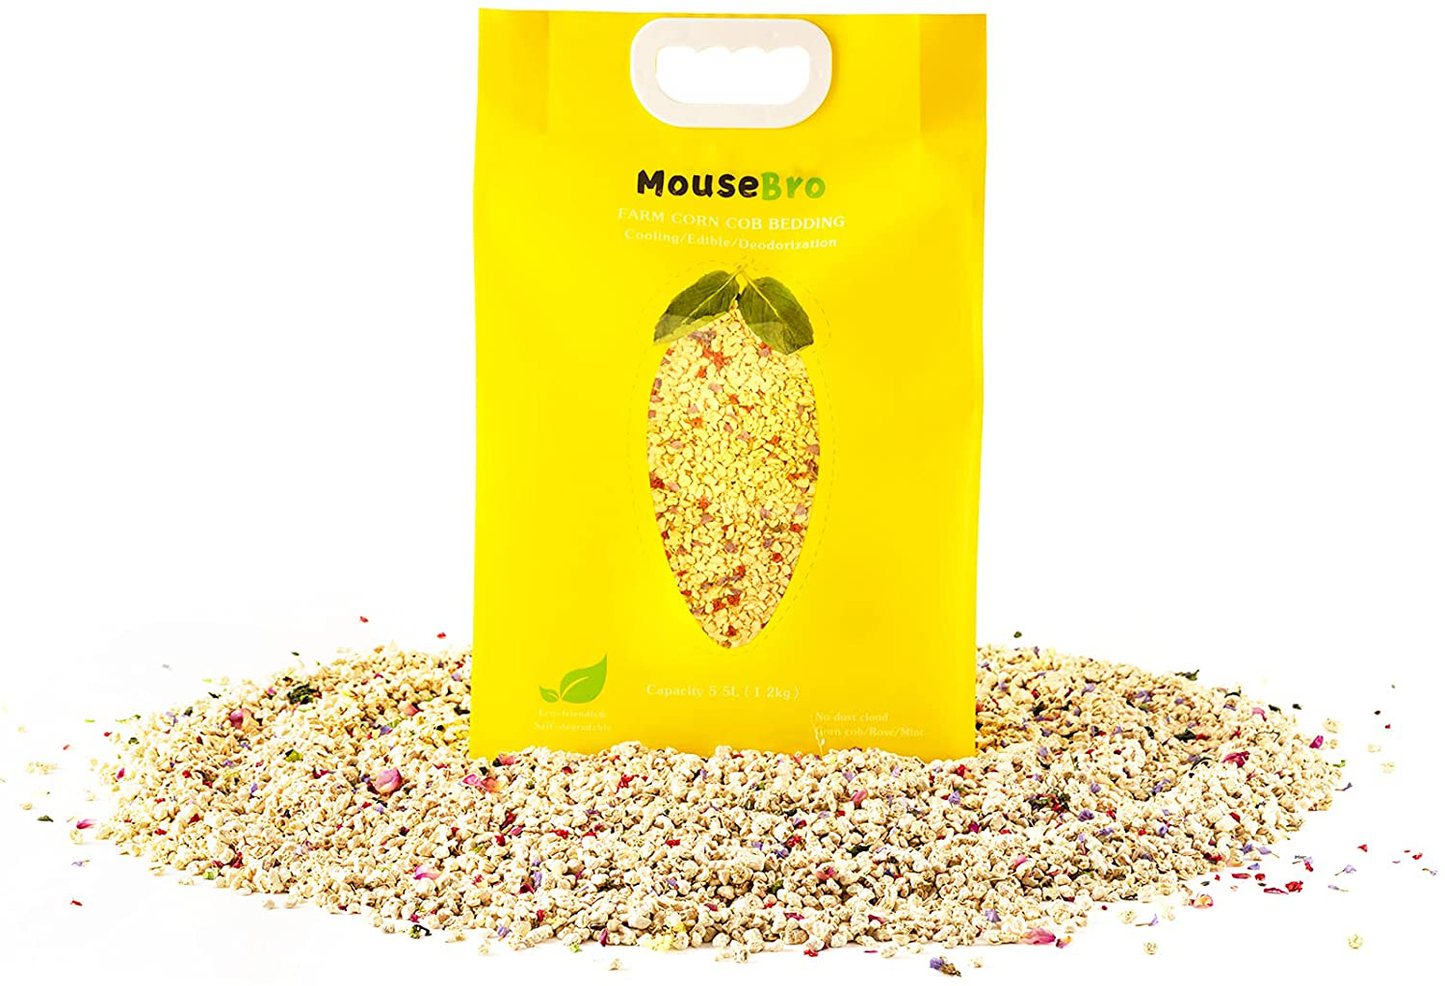 Mousebro Natural Mixed Hamster Bath Sand/Wood/Corn Cob Hamster Bedding for Syrian Dwarf Hamsters Gerbils Mice Lizard and Other Small Animals